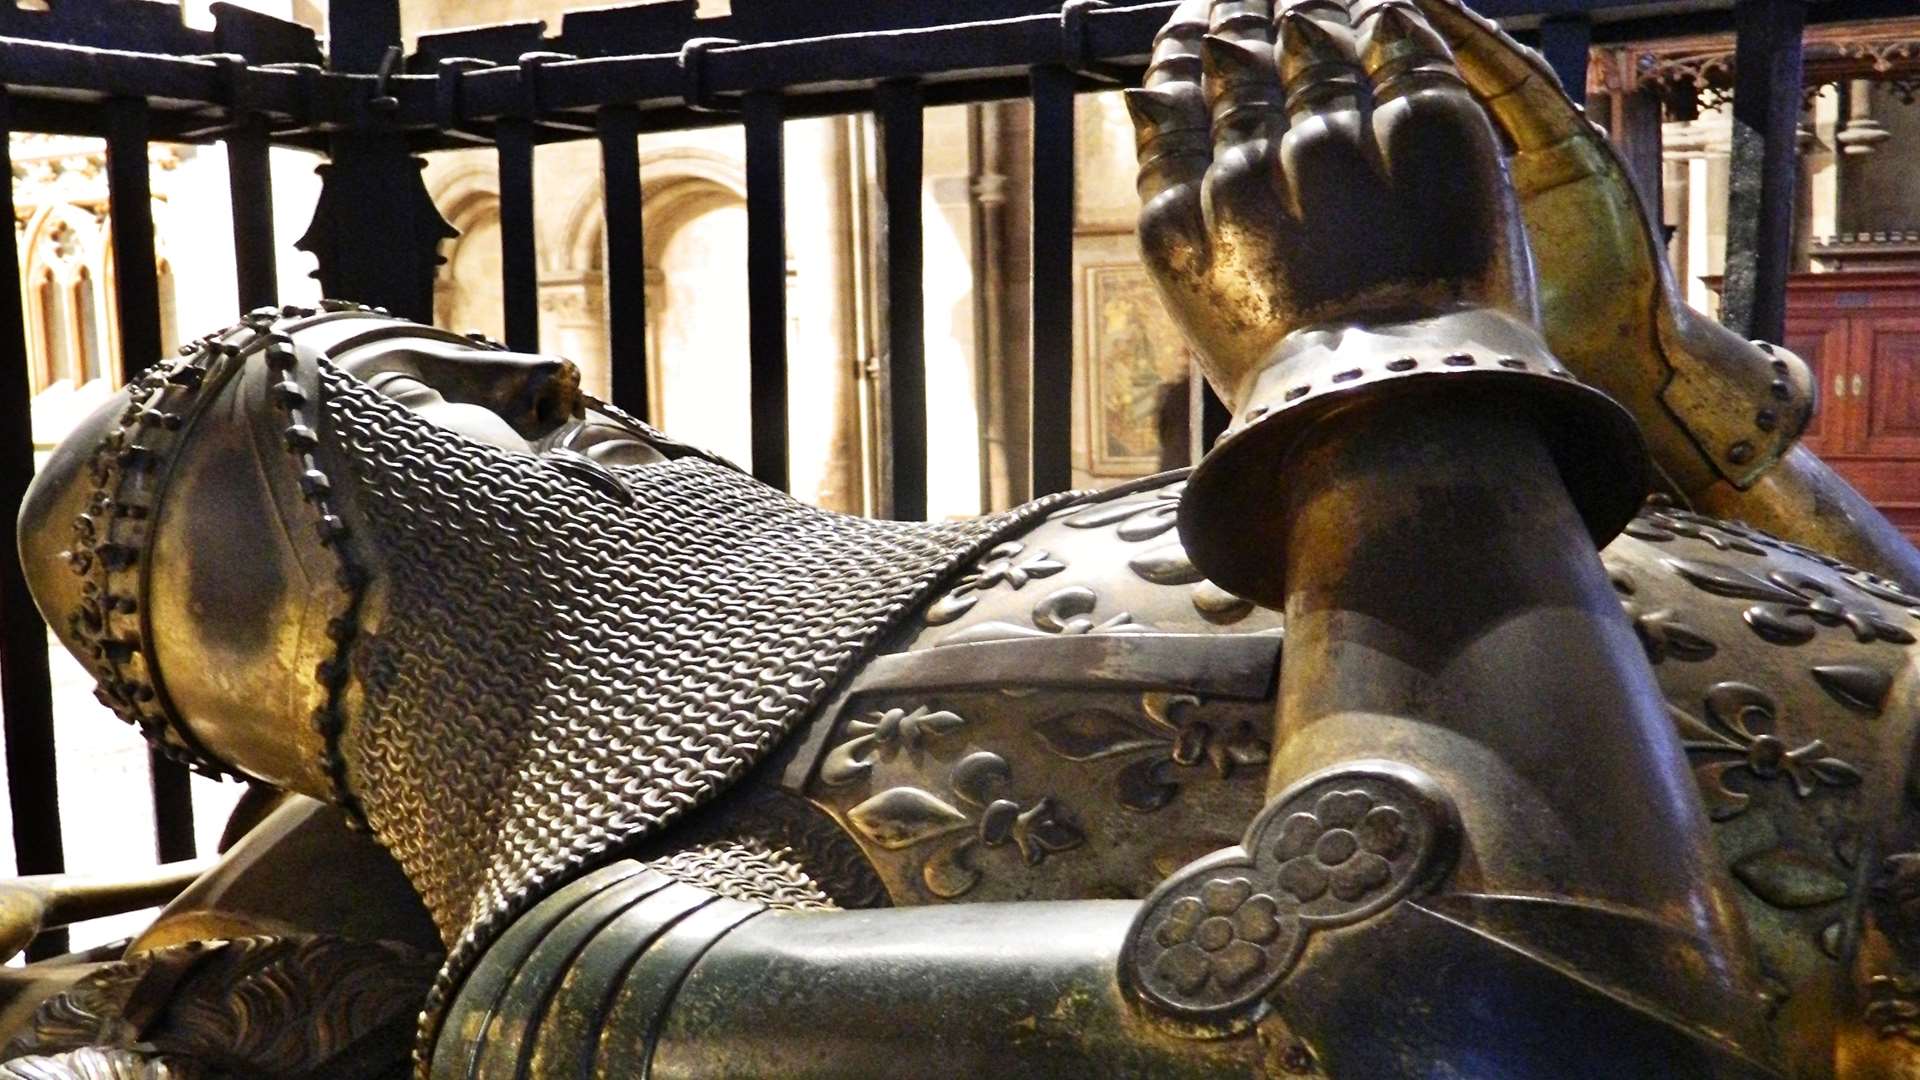 The Black Prince's tomb in Canterbury Cathedral